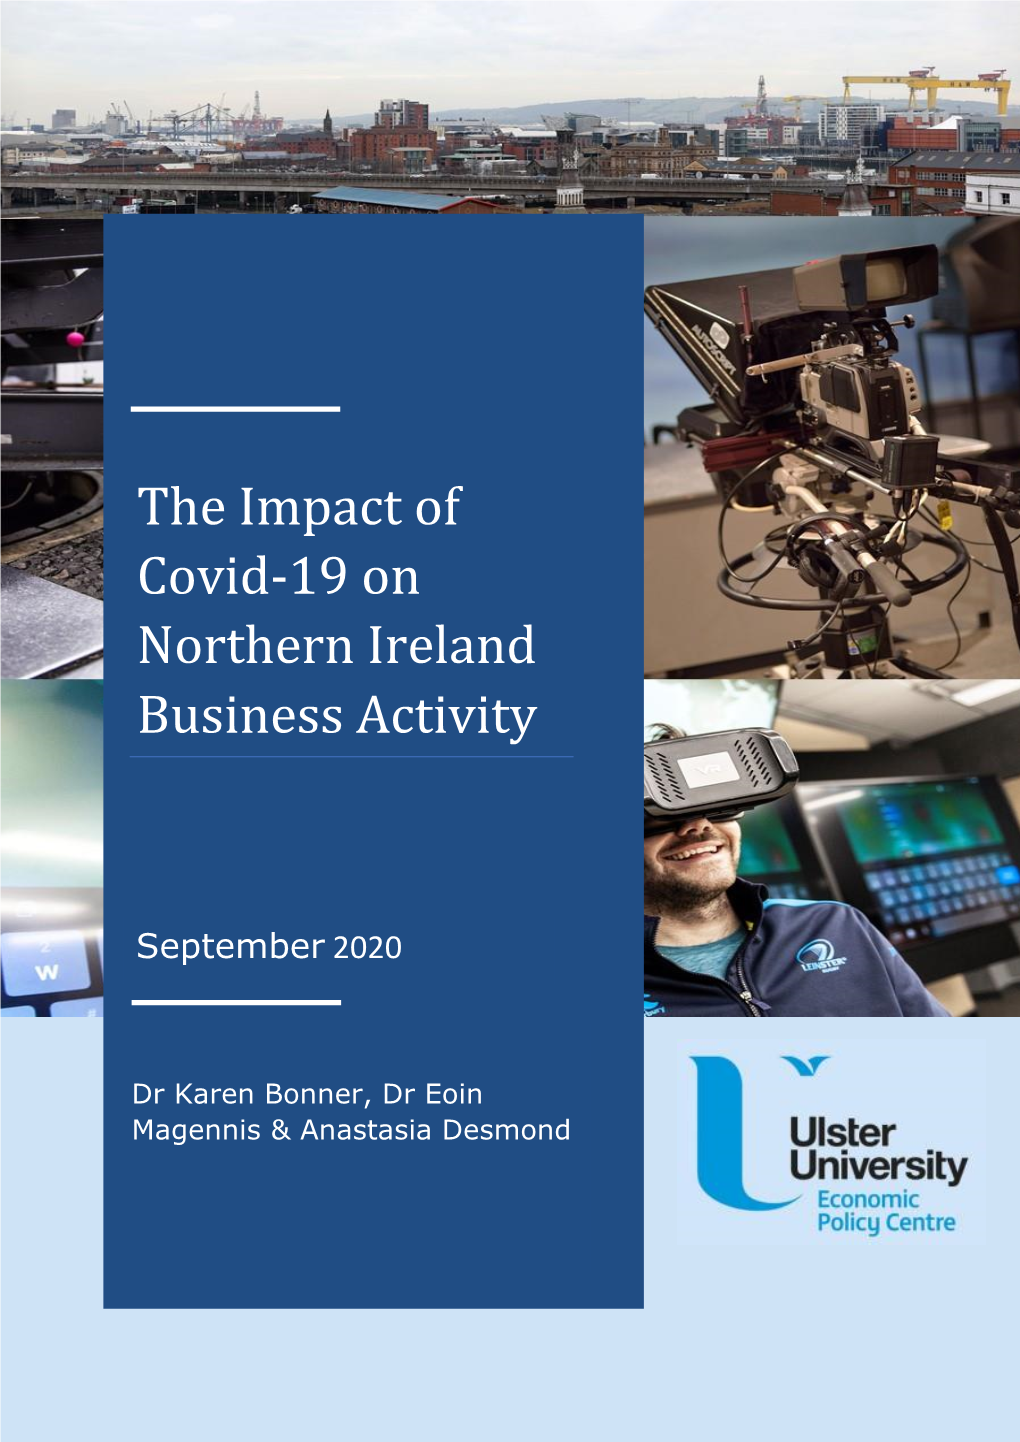 The Impact of Covid-19 on Northern Ireland Business Activity